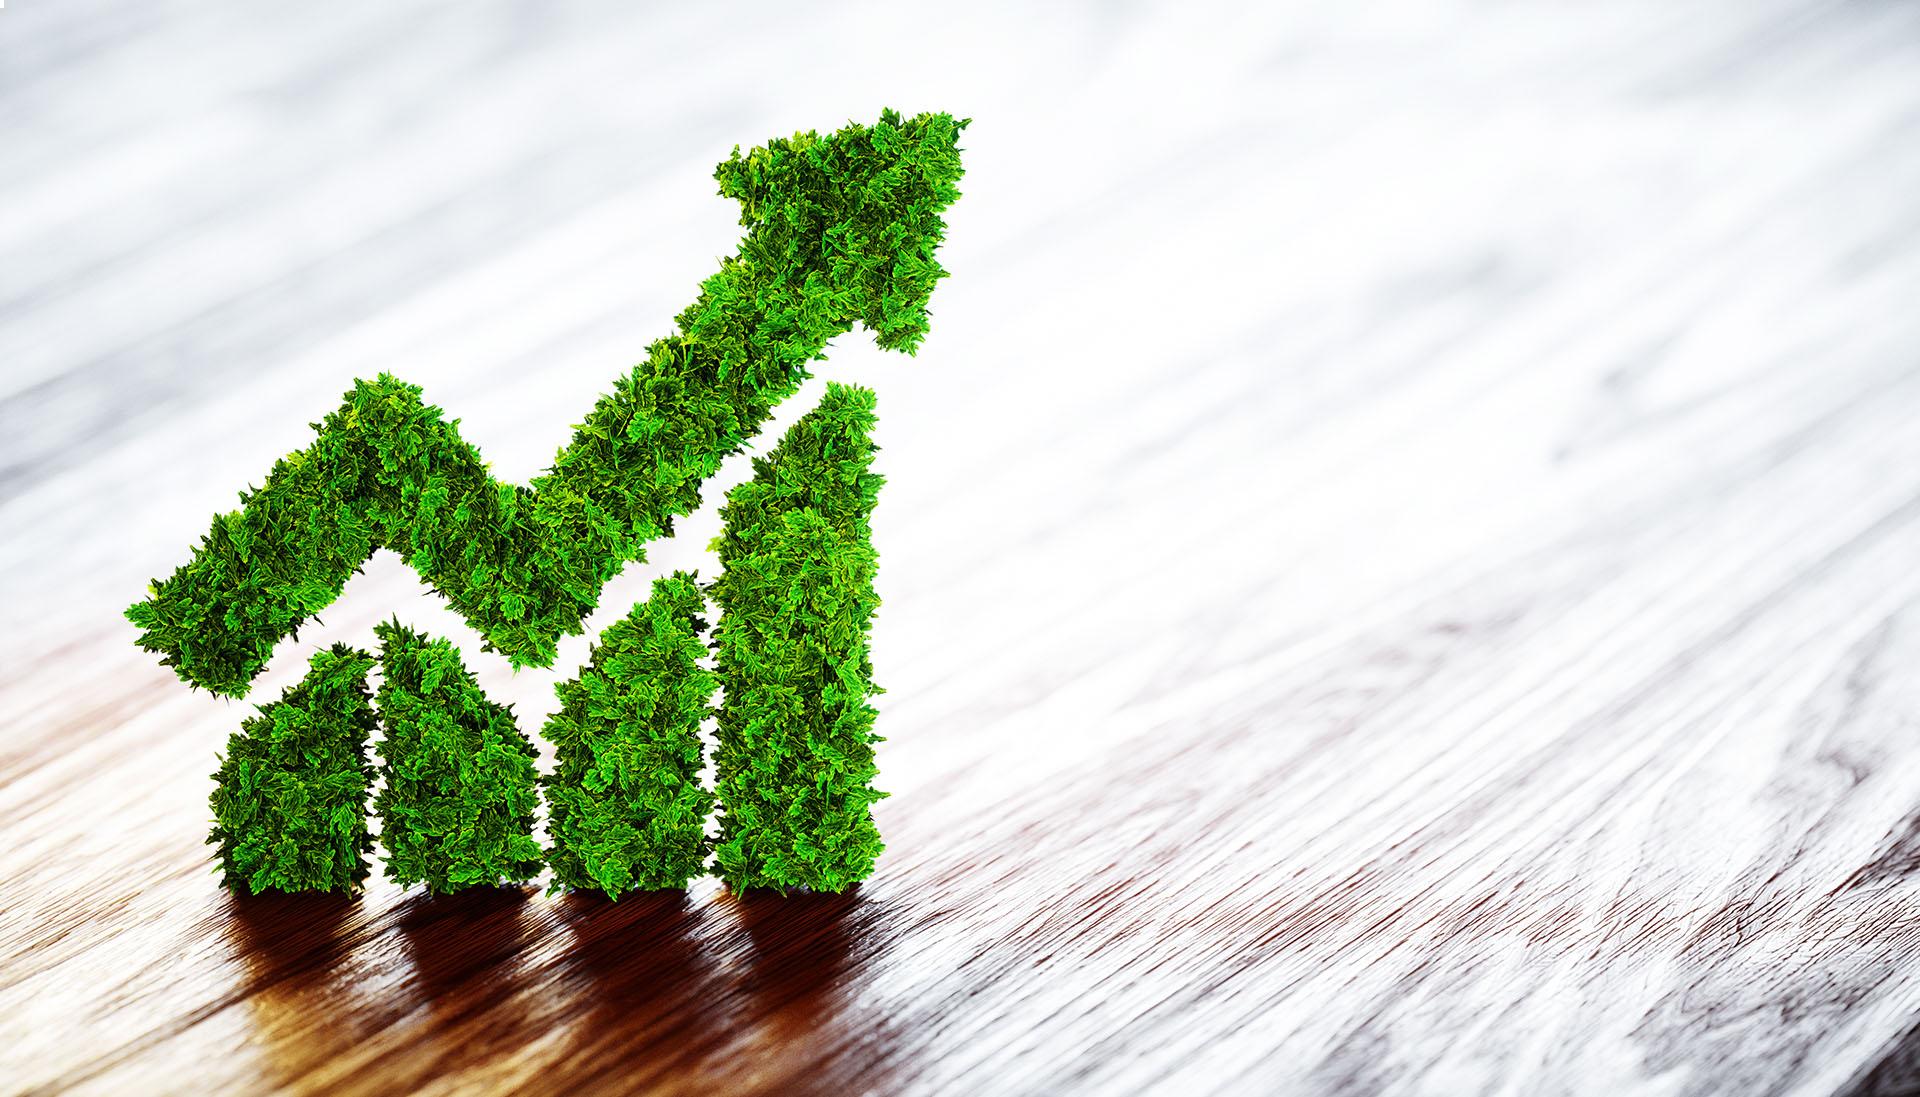 Boosting your Business’s Green Credentials through Acquisition